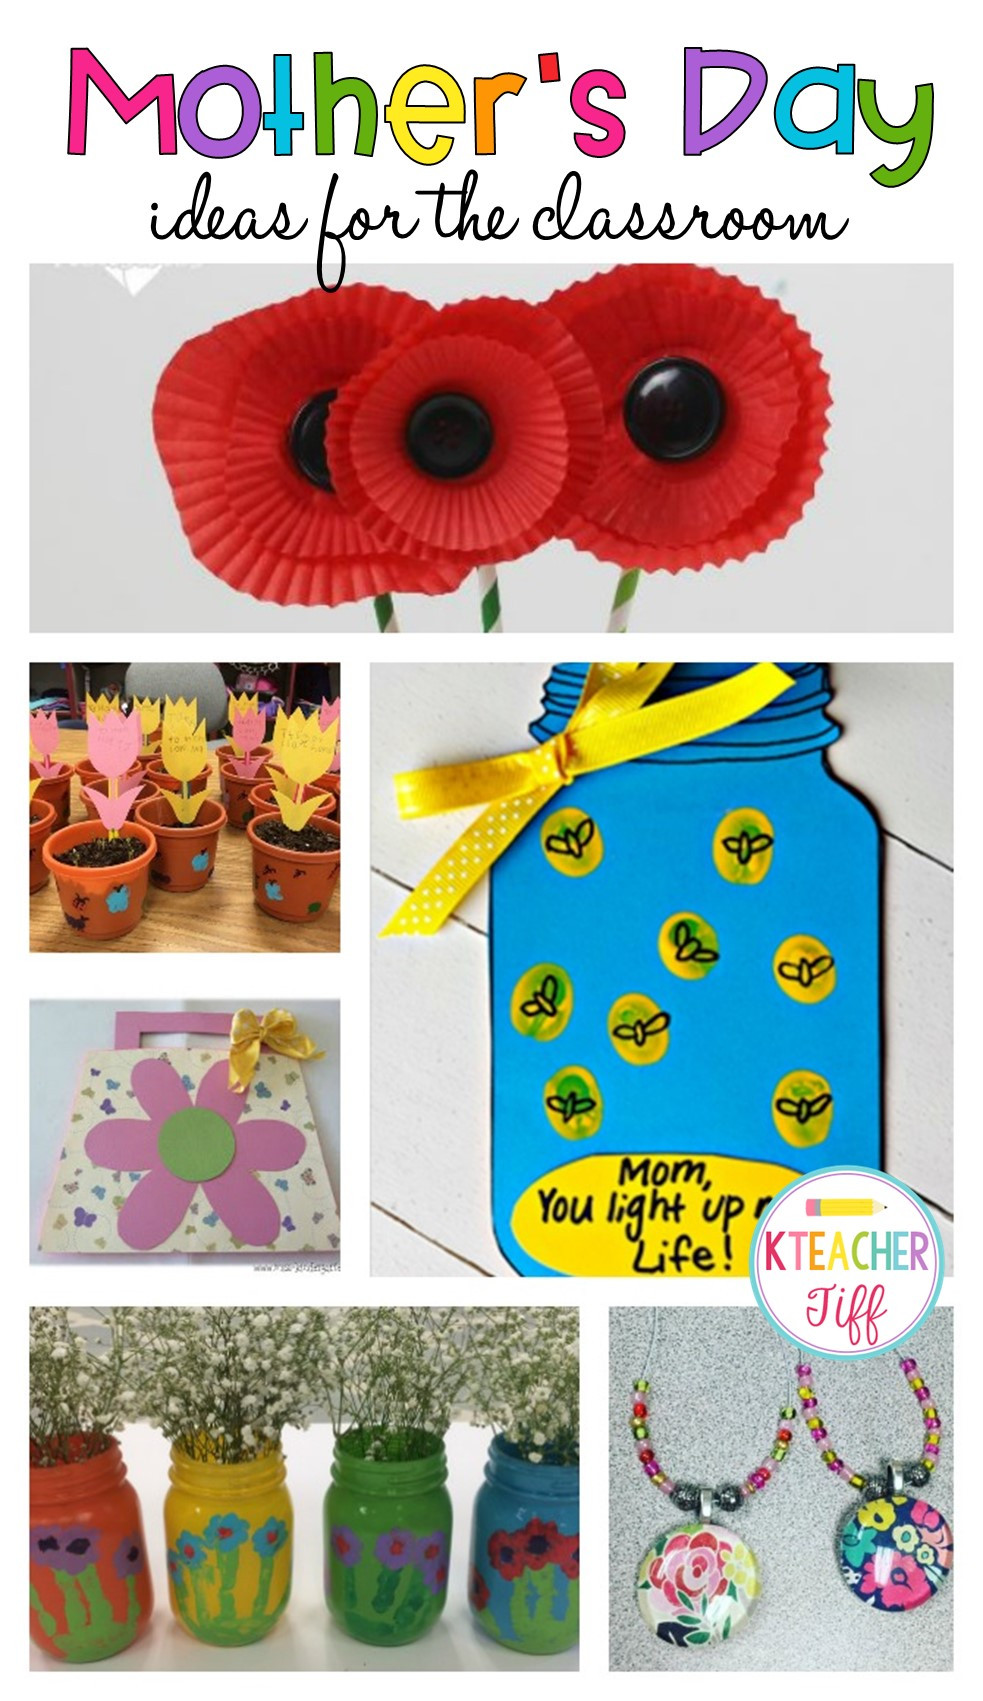 Mother's Day Gifts Ideas
 Mother s Day Gift Ideas for the Classroom KTeacherTiff